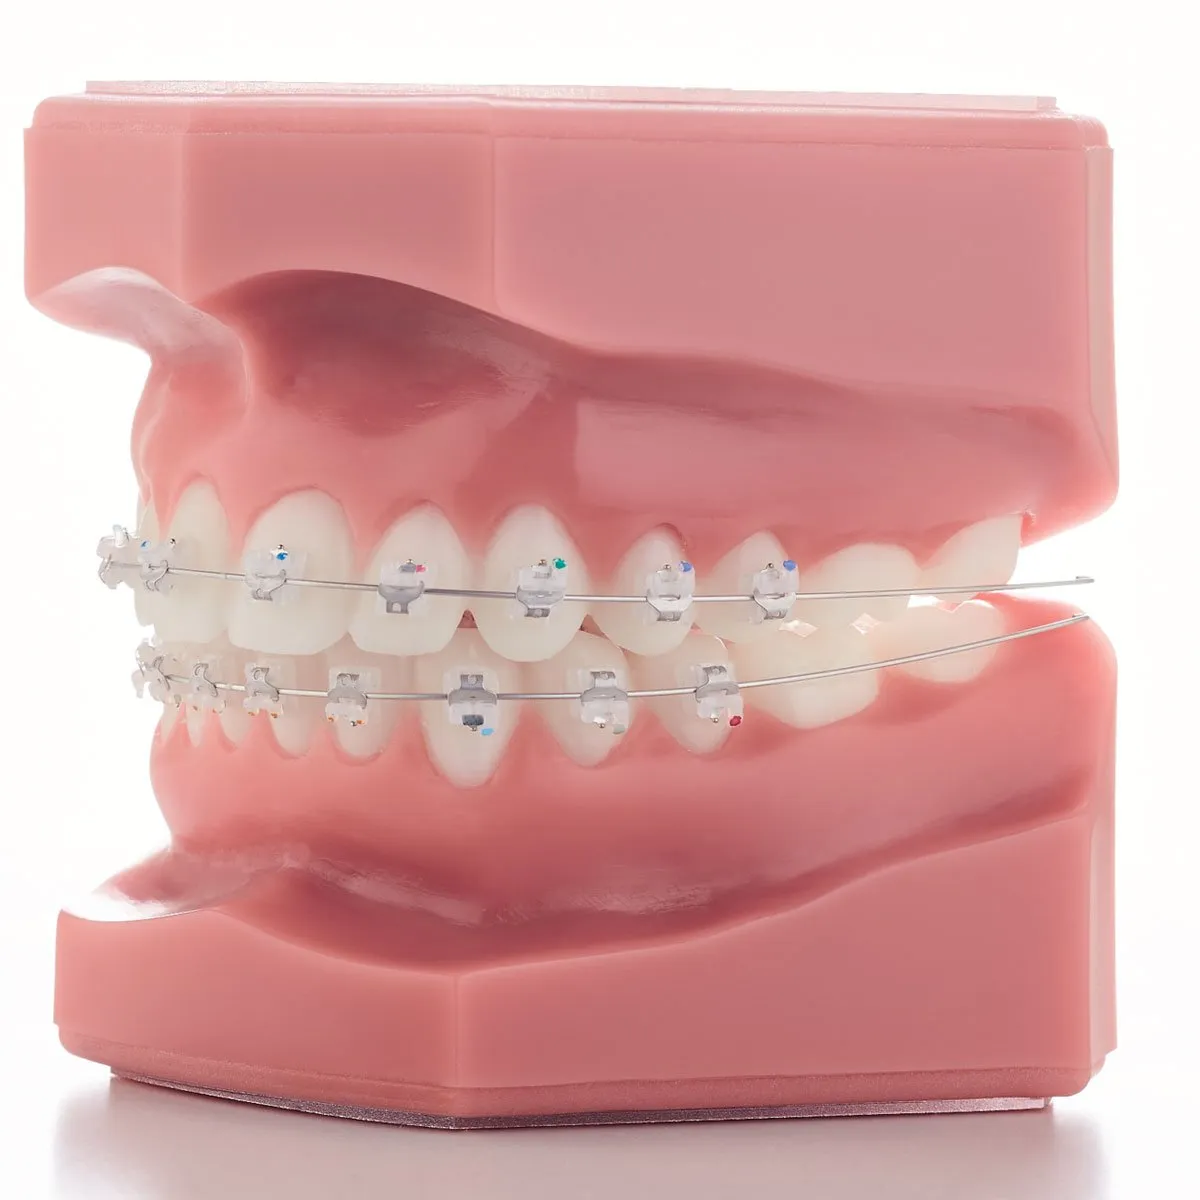 our ceramic braces from Japan